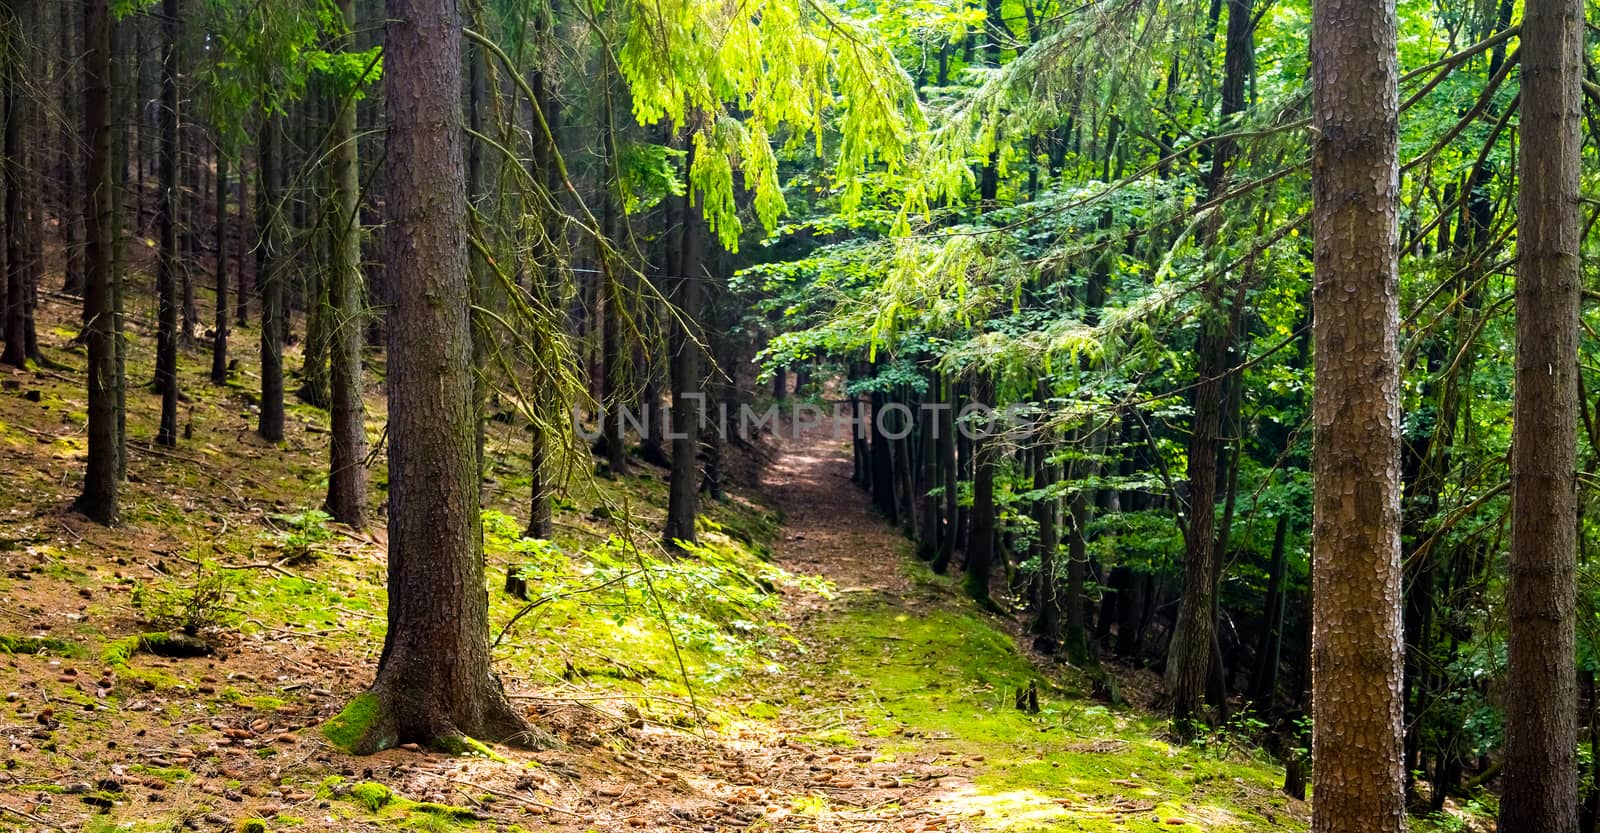 The spruce forest path by hanusst